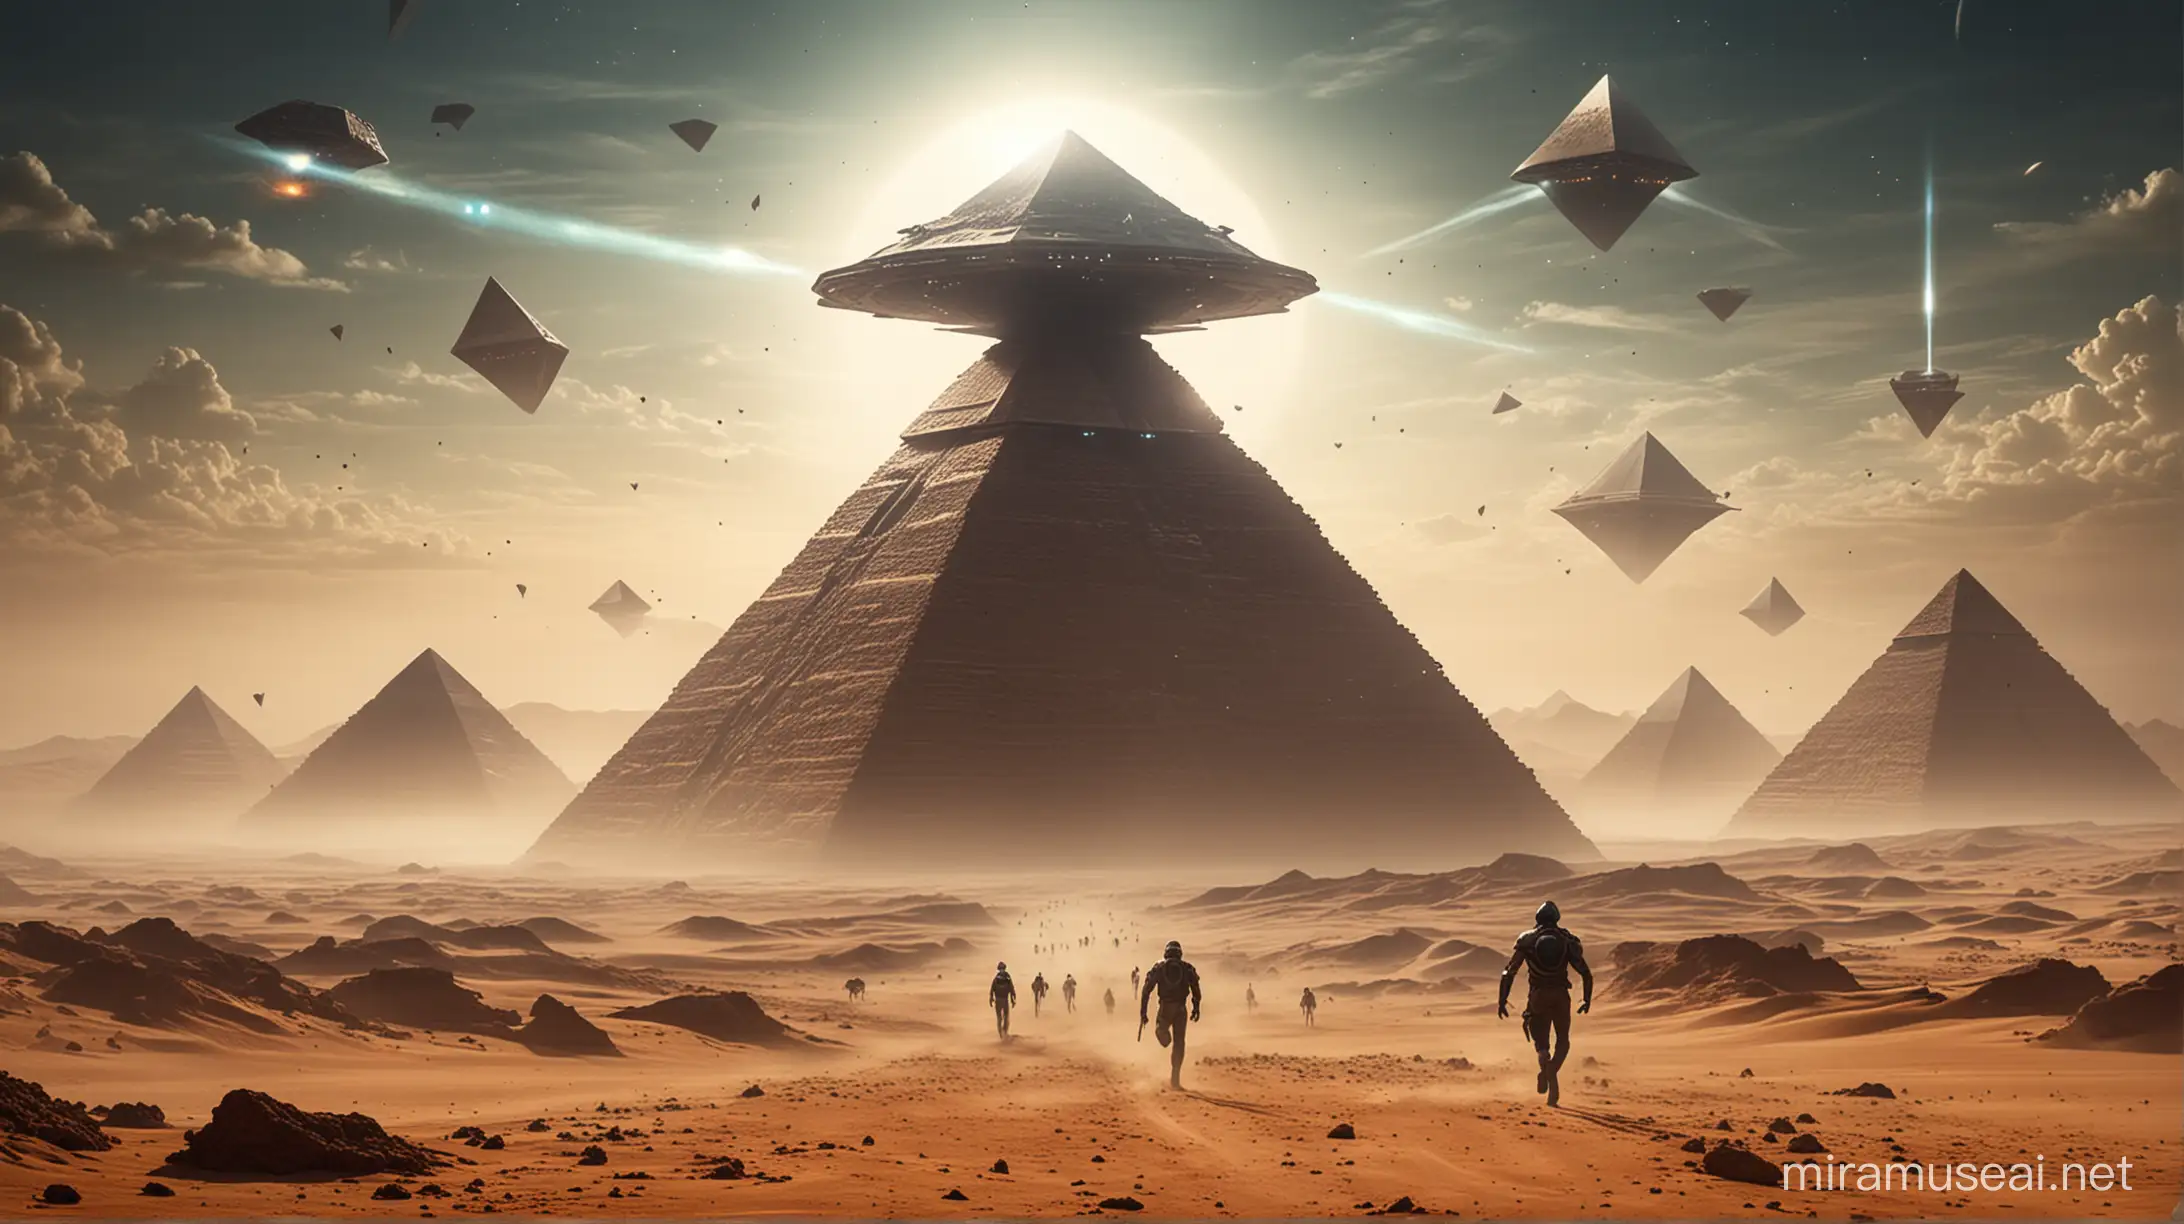 pyramids with spaceships hovering around, aliens walking, humans running